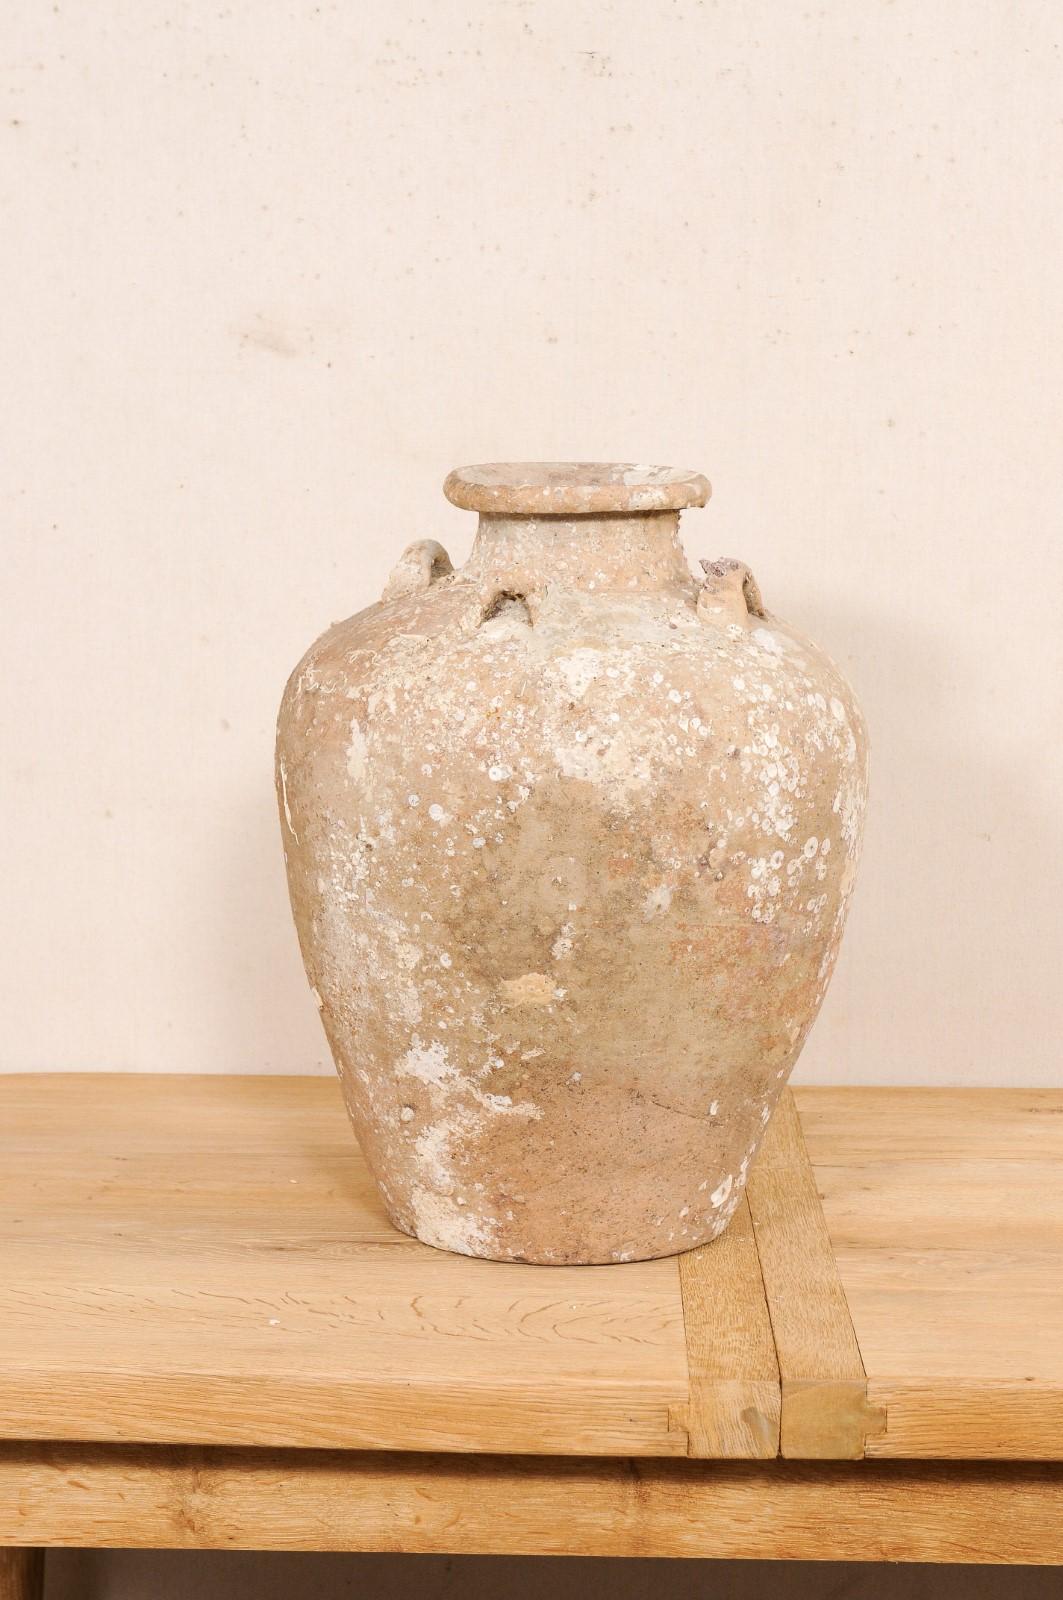 This early to mid 16th century ceramic vessel from Thailand is an excellent specimen of a salvaged ceramic jar from a shipwreck during in the Ming gap period. This antique jar from Thailand stands just over 2 feet in height and has a rounded body,